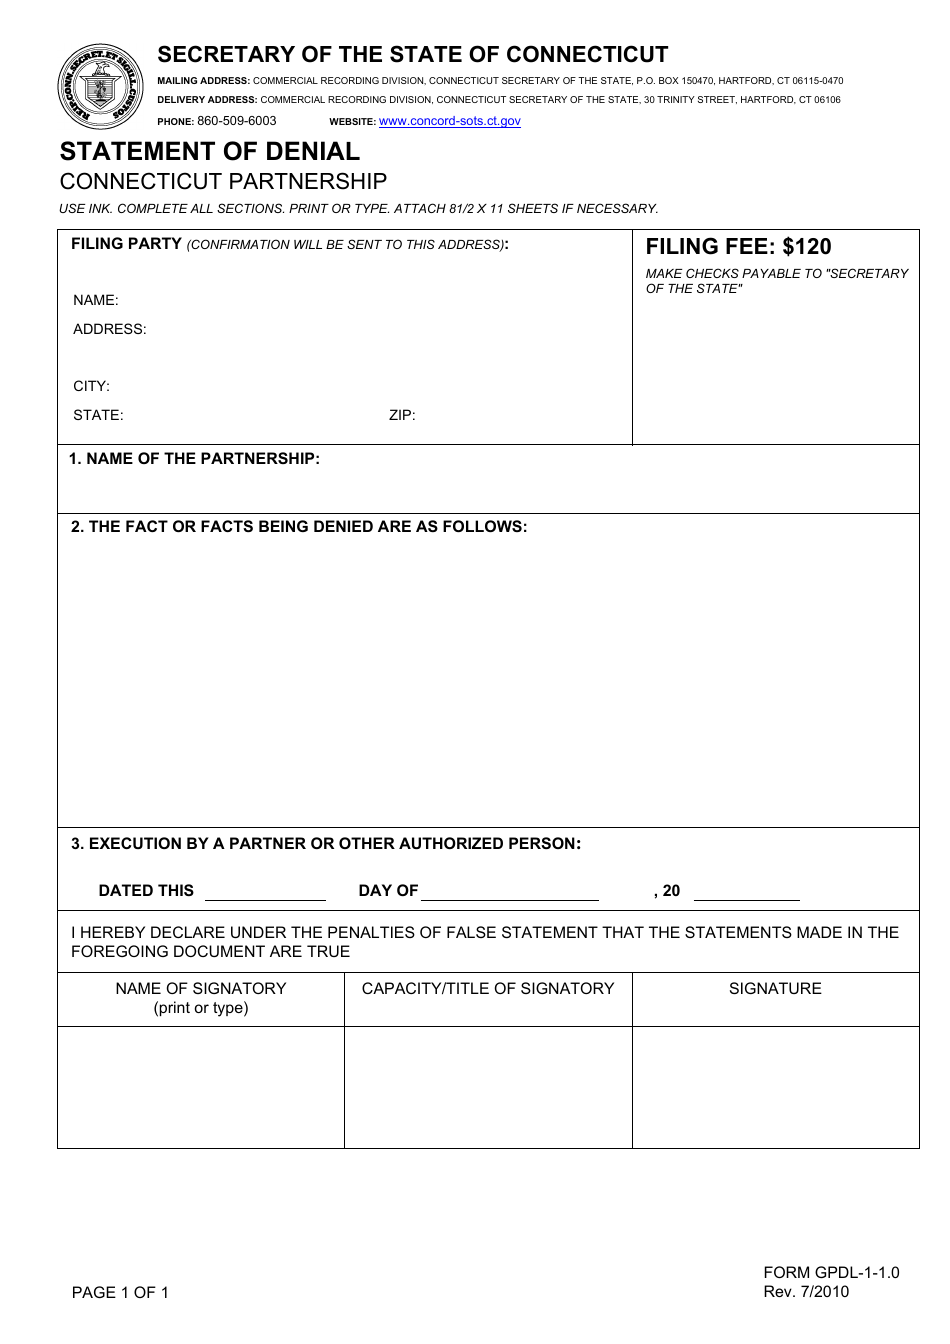 Form GPDL-1-1.0 Statement of Denial - Connecticut, Page 1